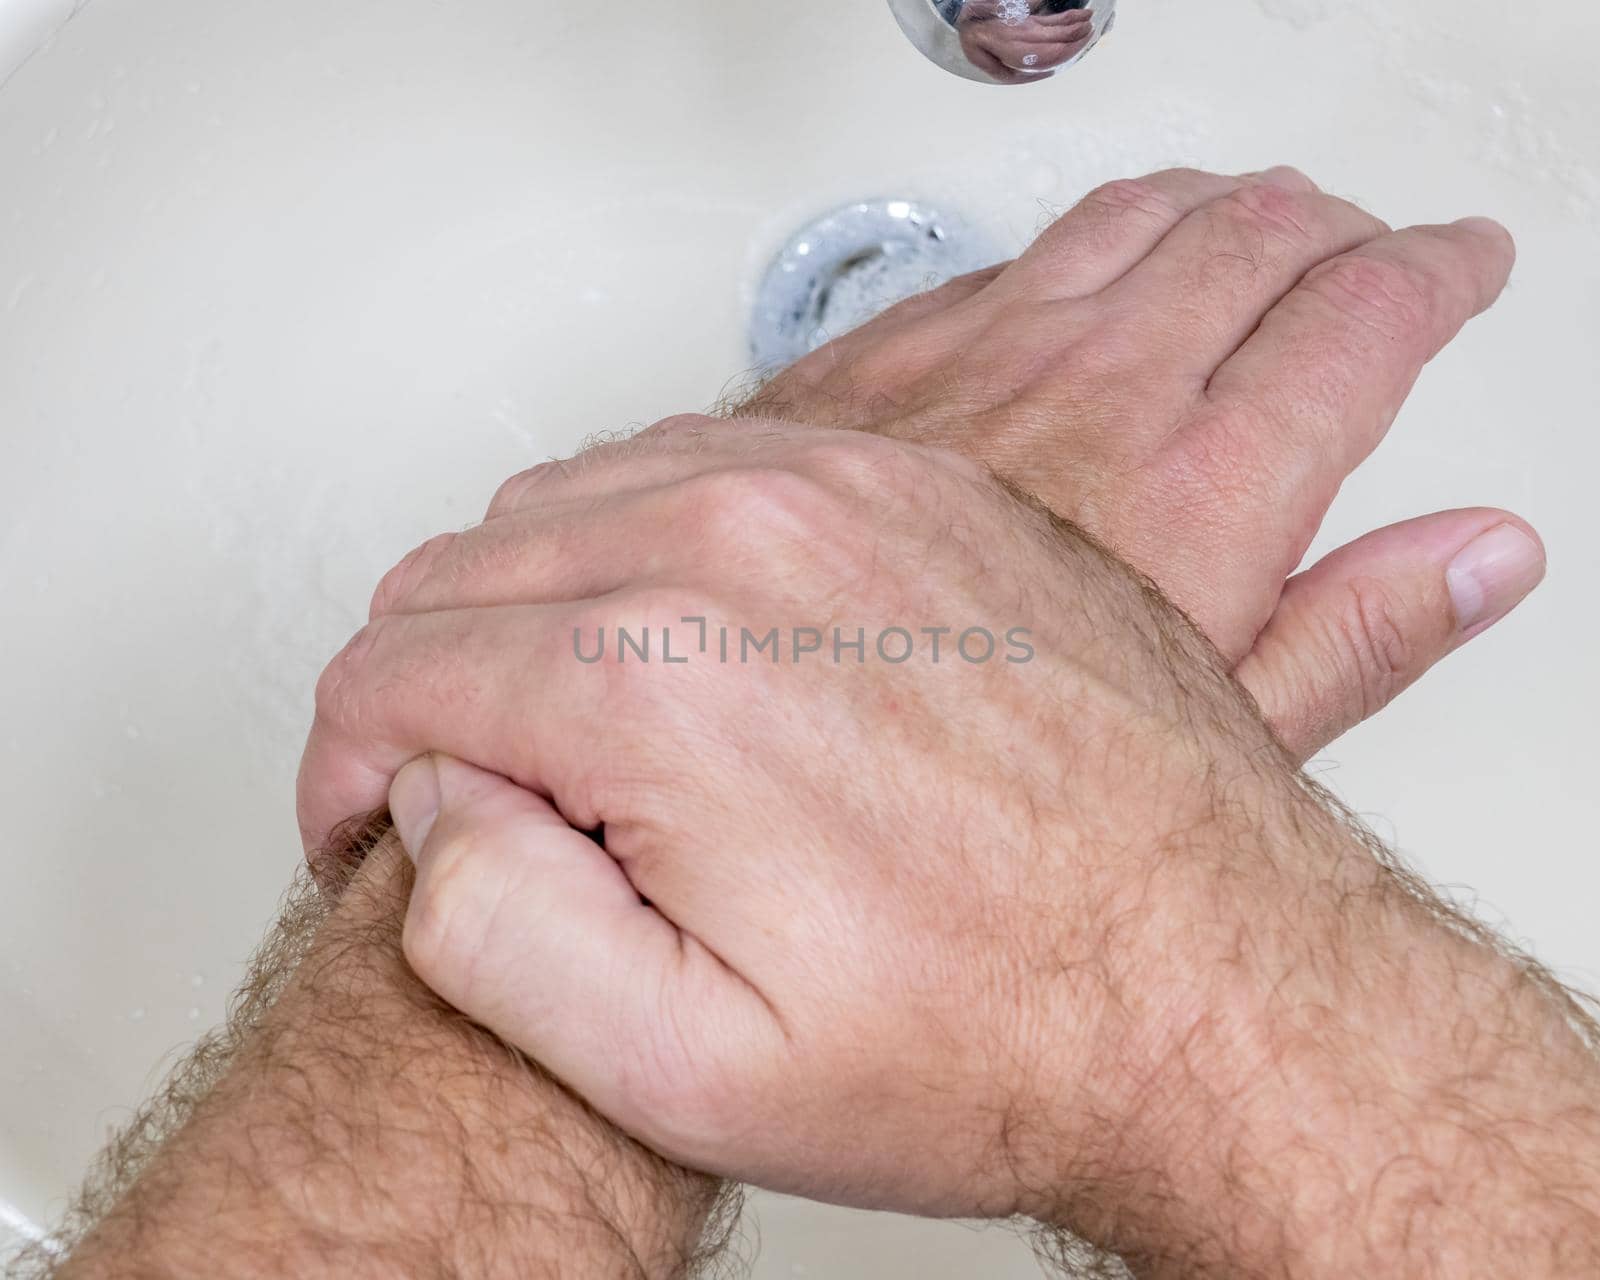 Man washing hands close-up from above by imagesbykenny